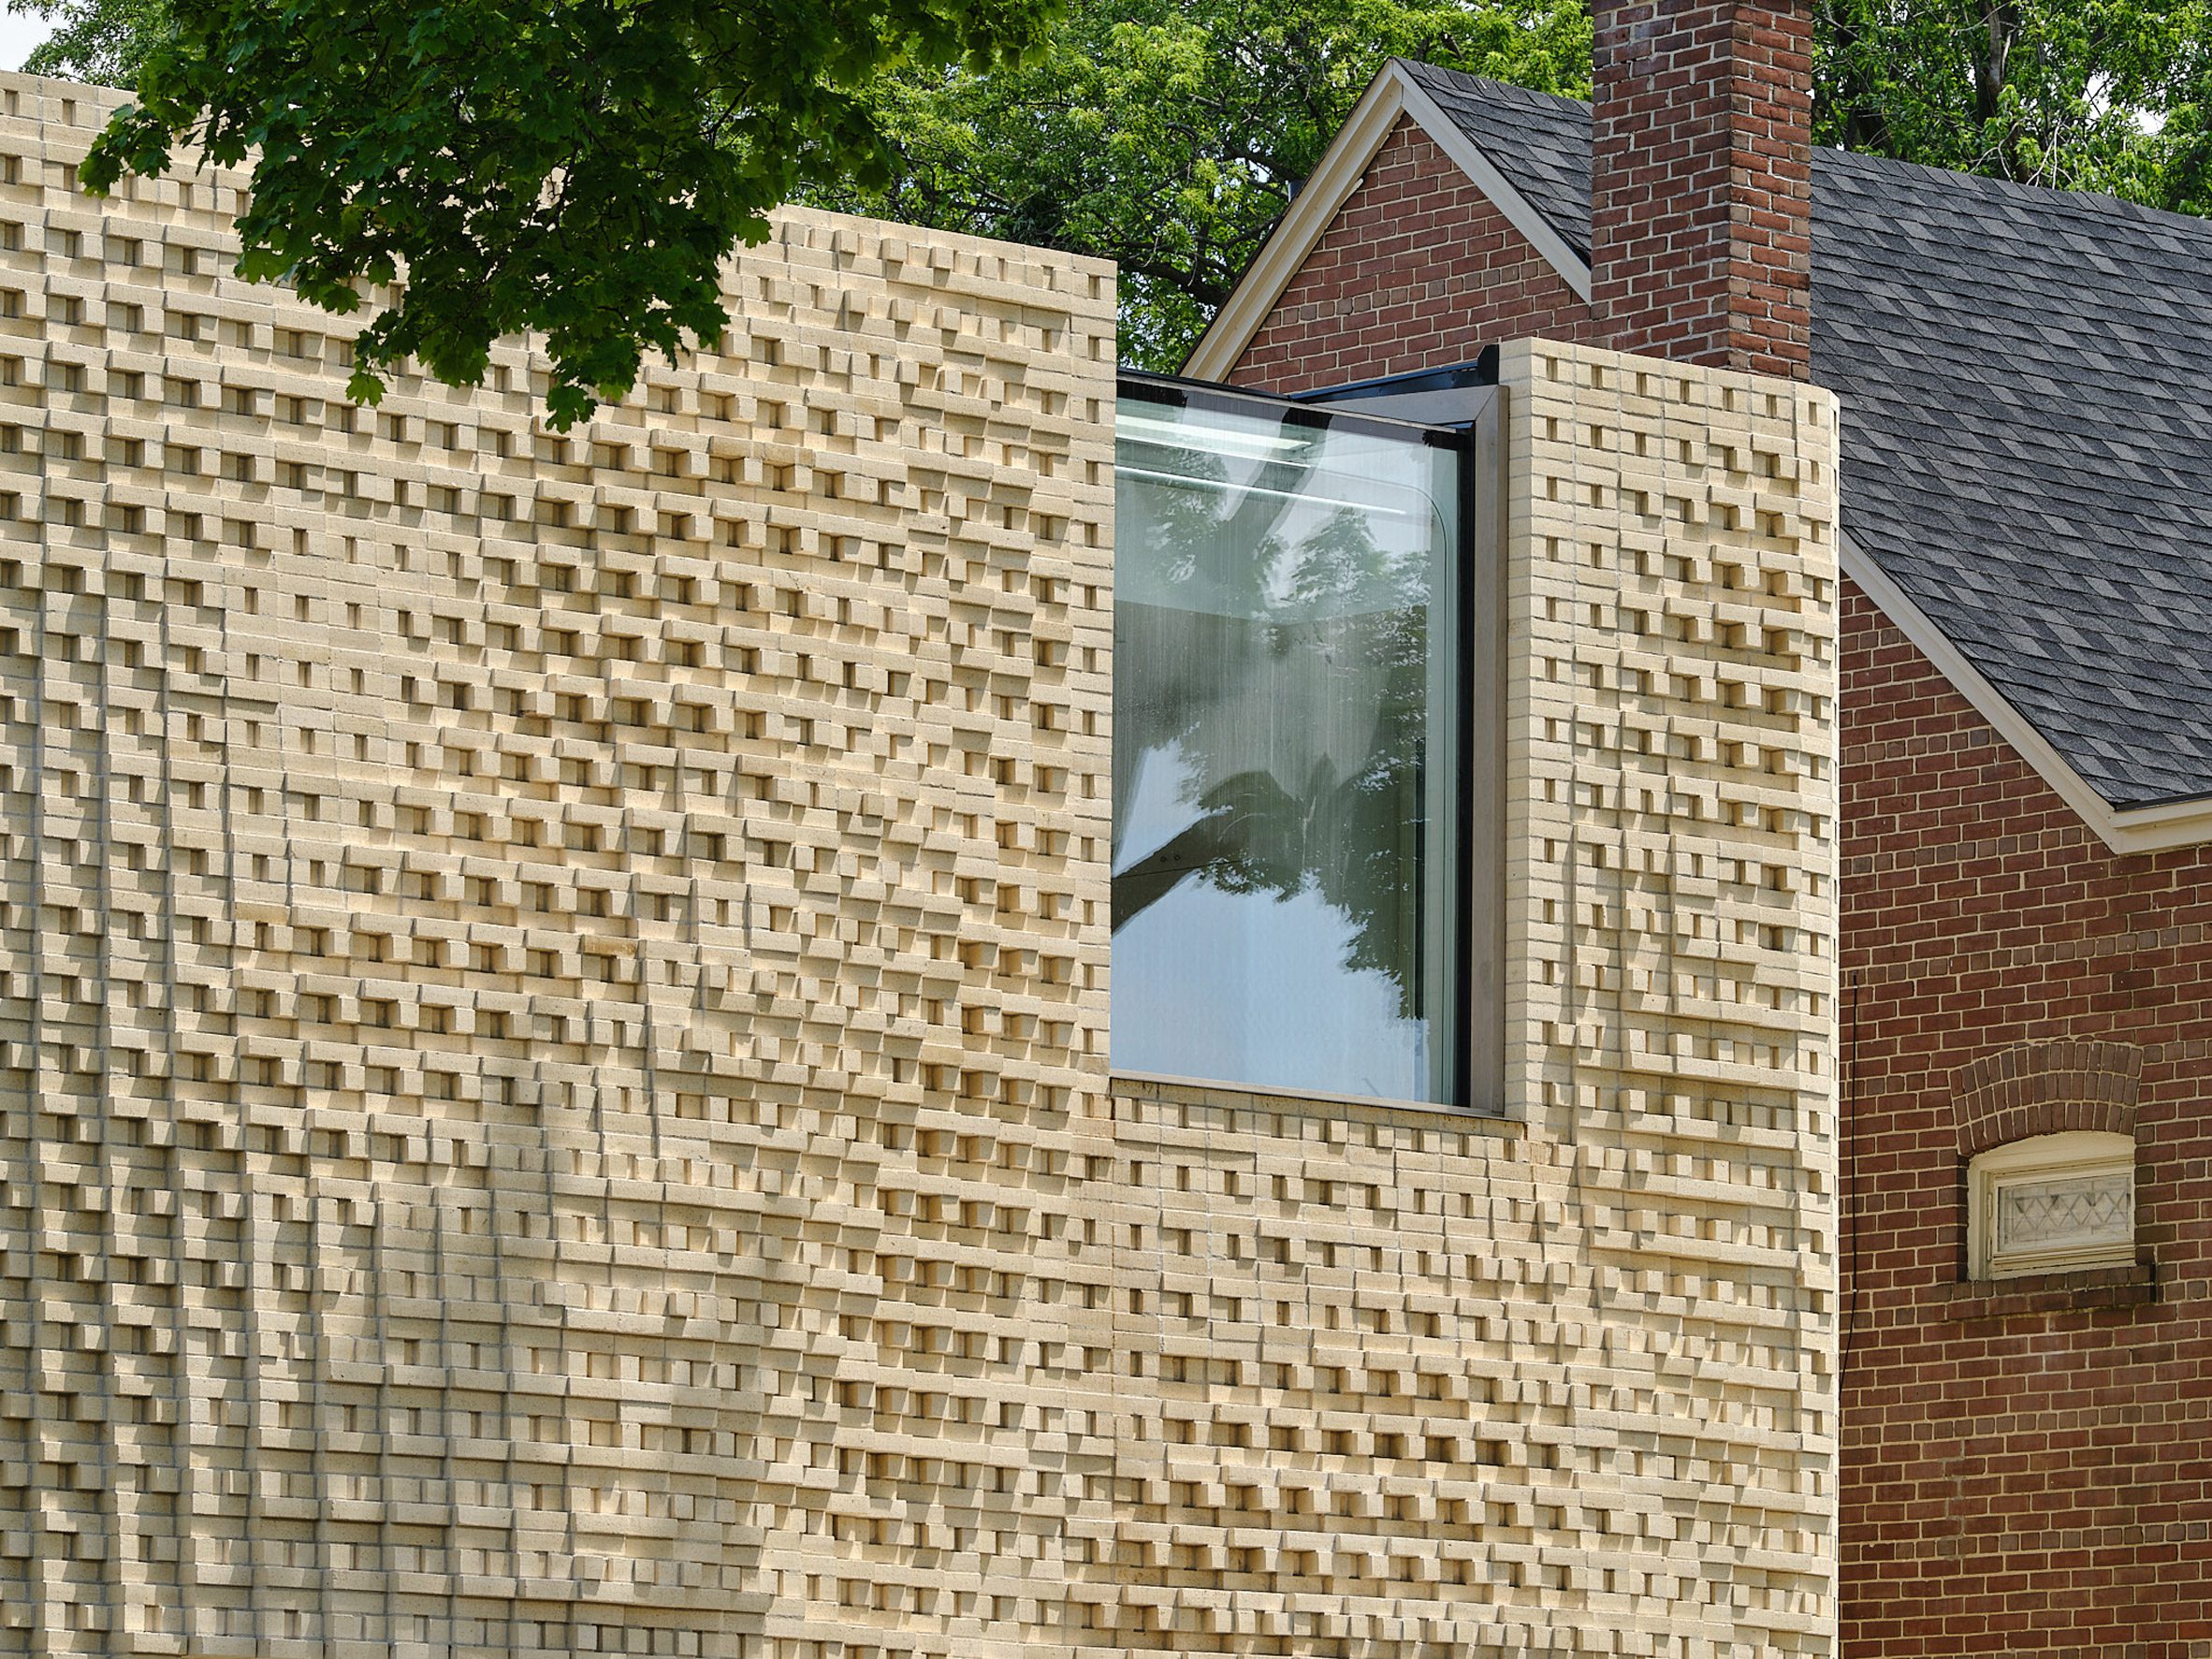 Undulating pattern on exterior of a house